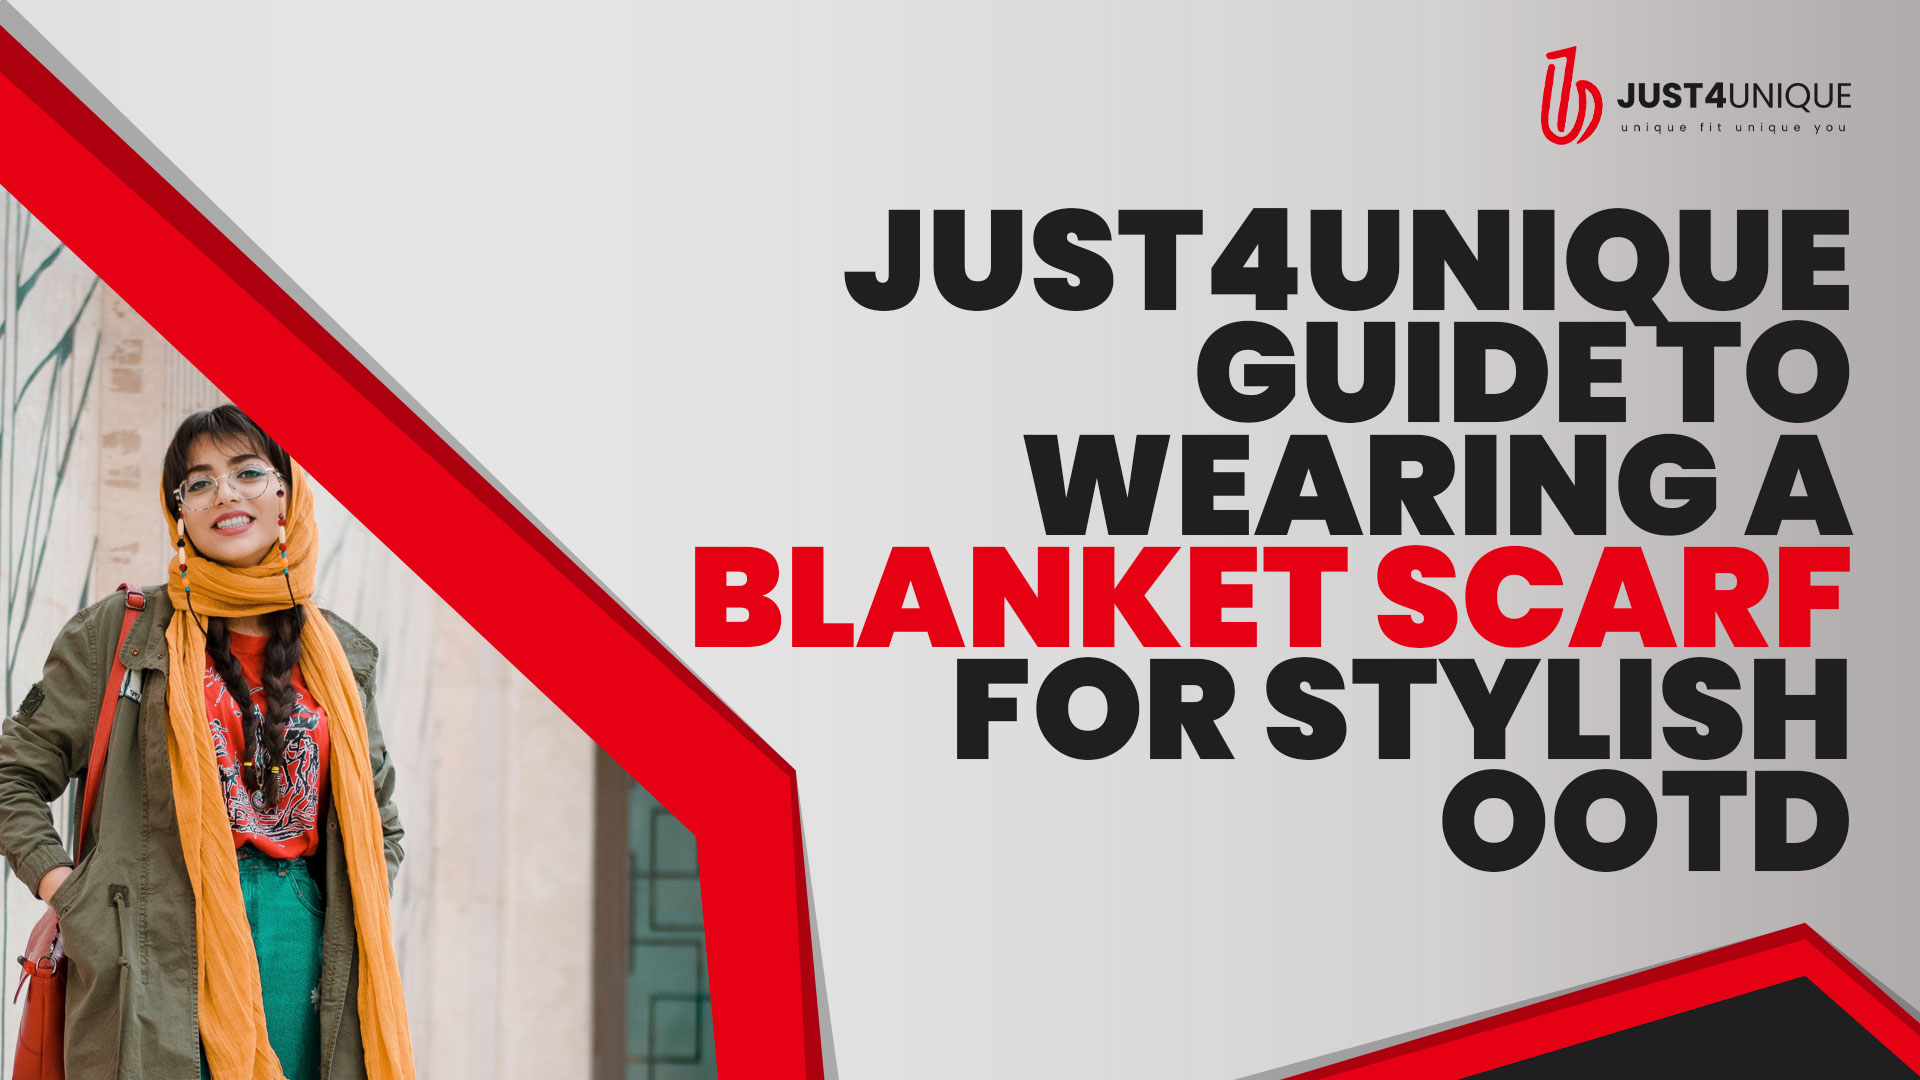 The Just4unique Guide to Wearing a Blanket Scarf For Stylish OOTD